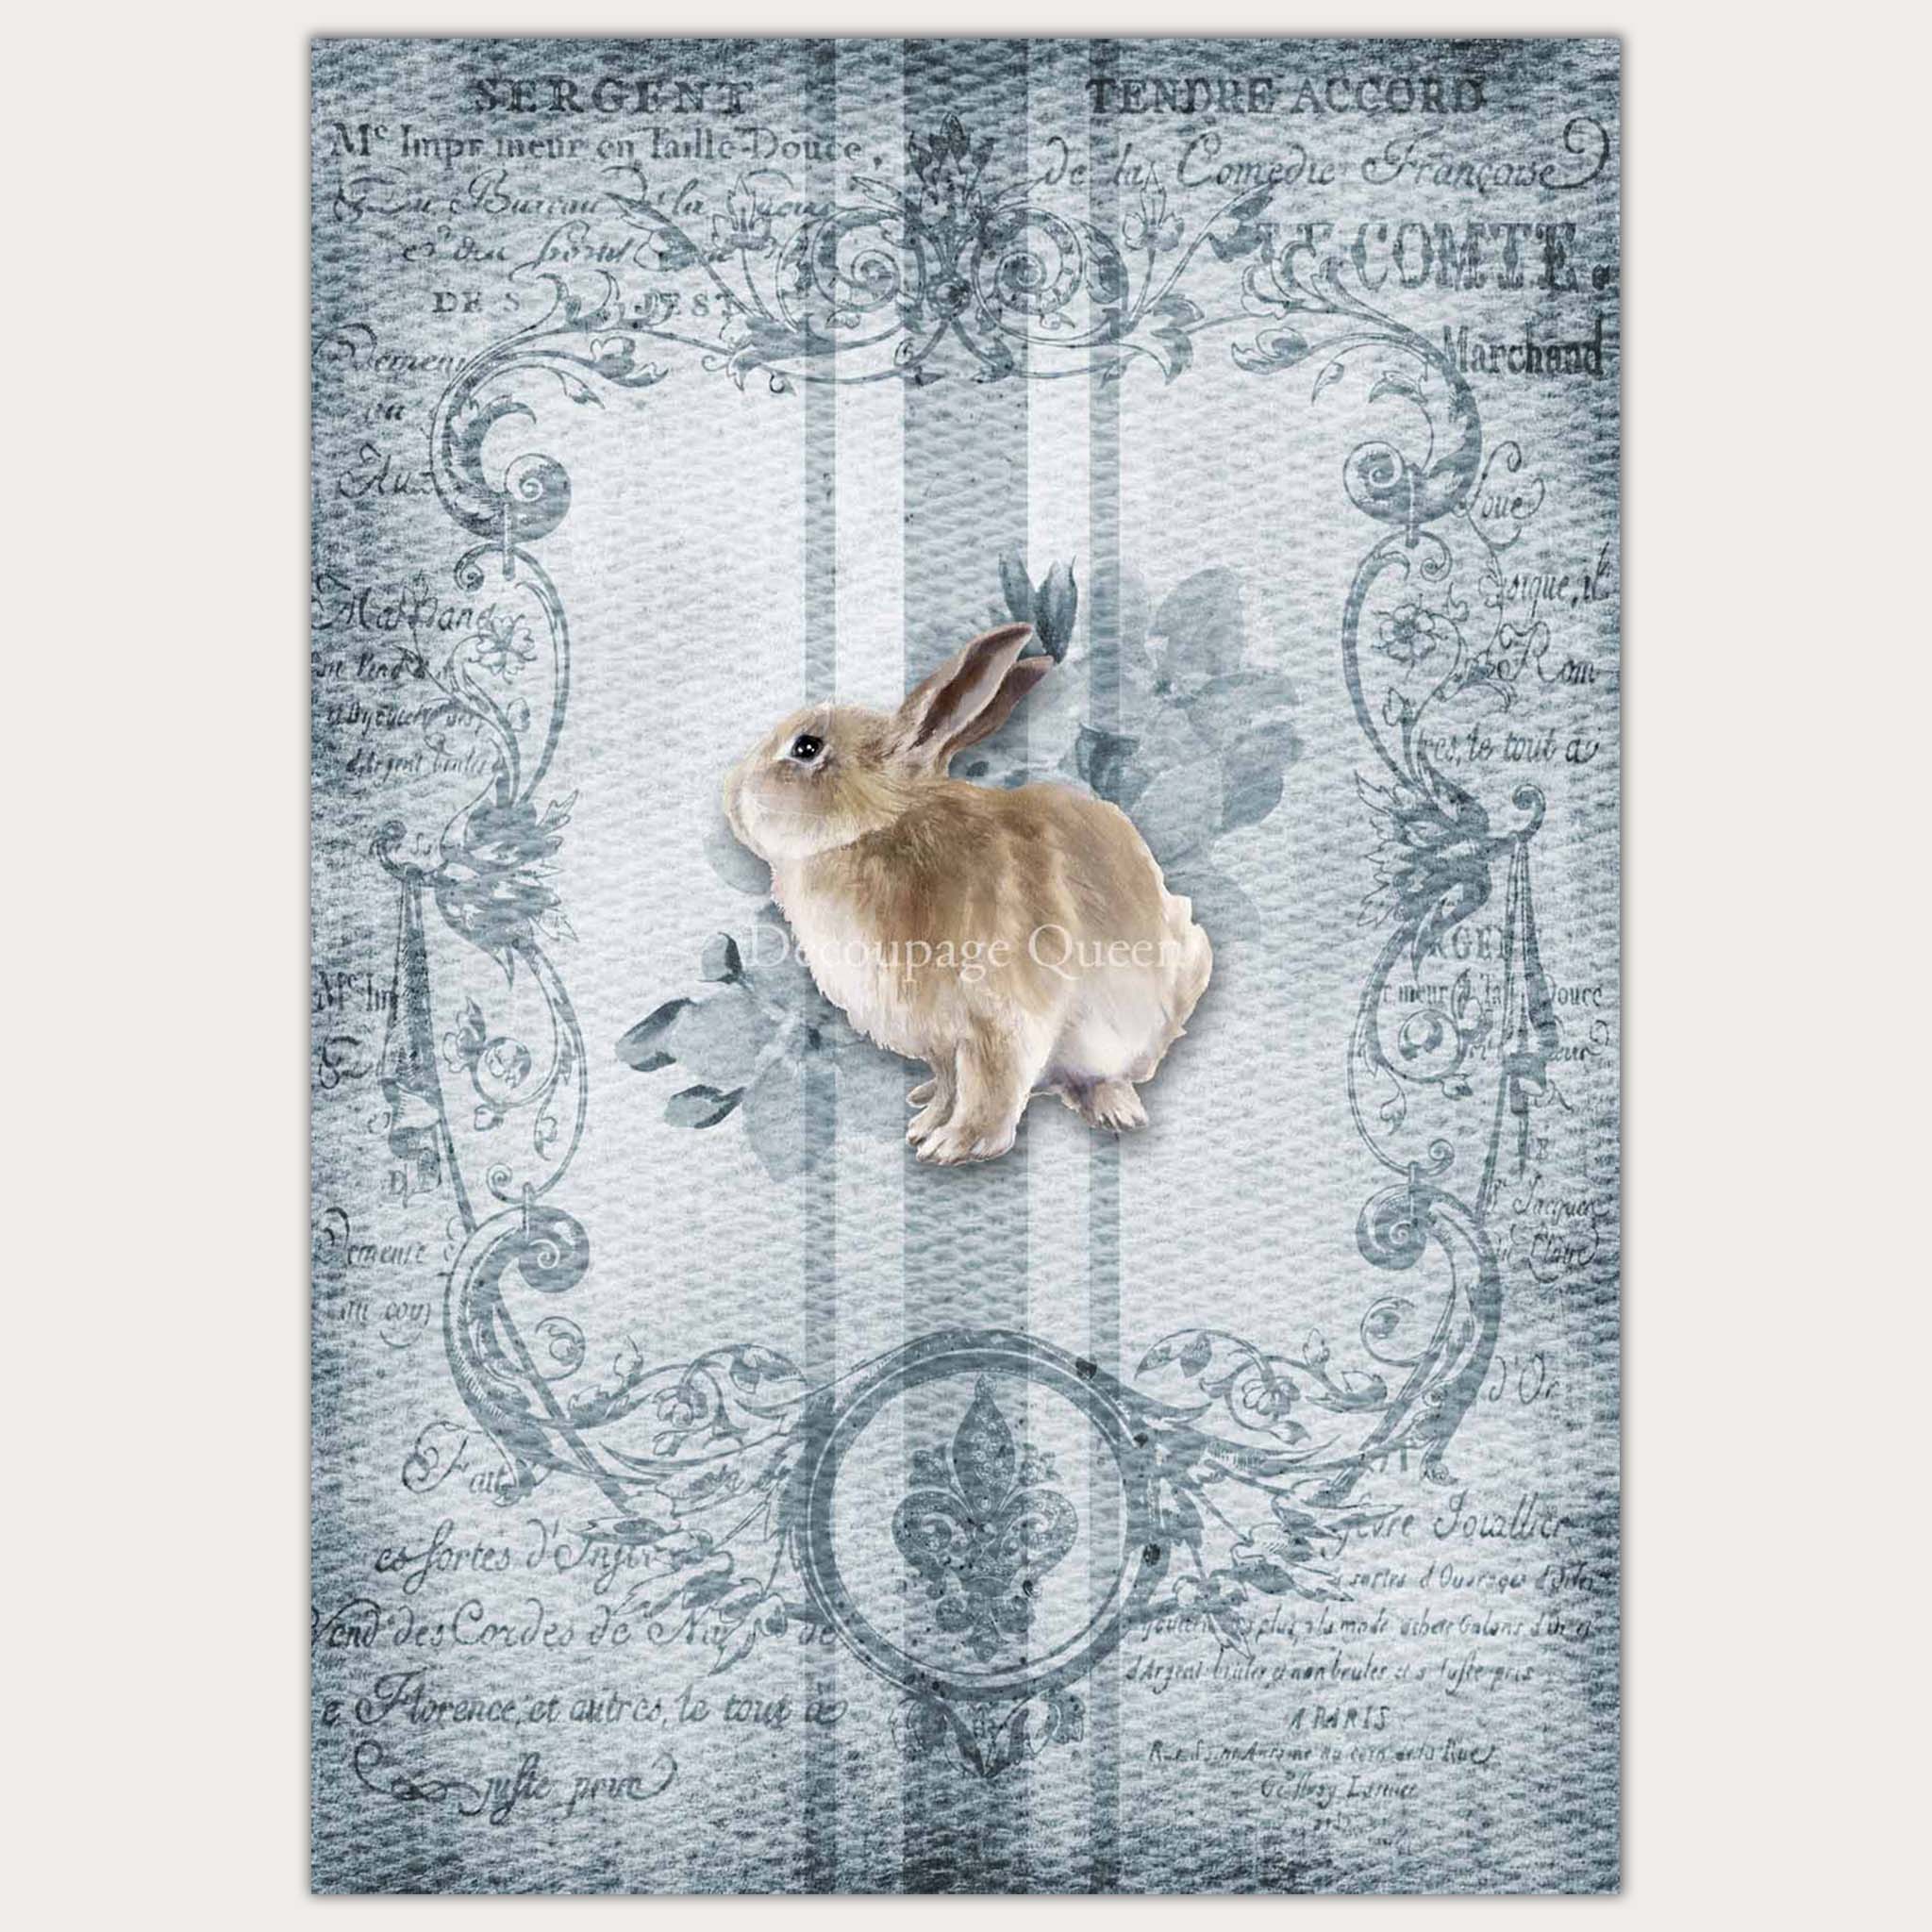 A4 rice paper designs of faded French writing with a bunny on a blue grain sack pattern. White borders are on the sides.